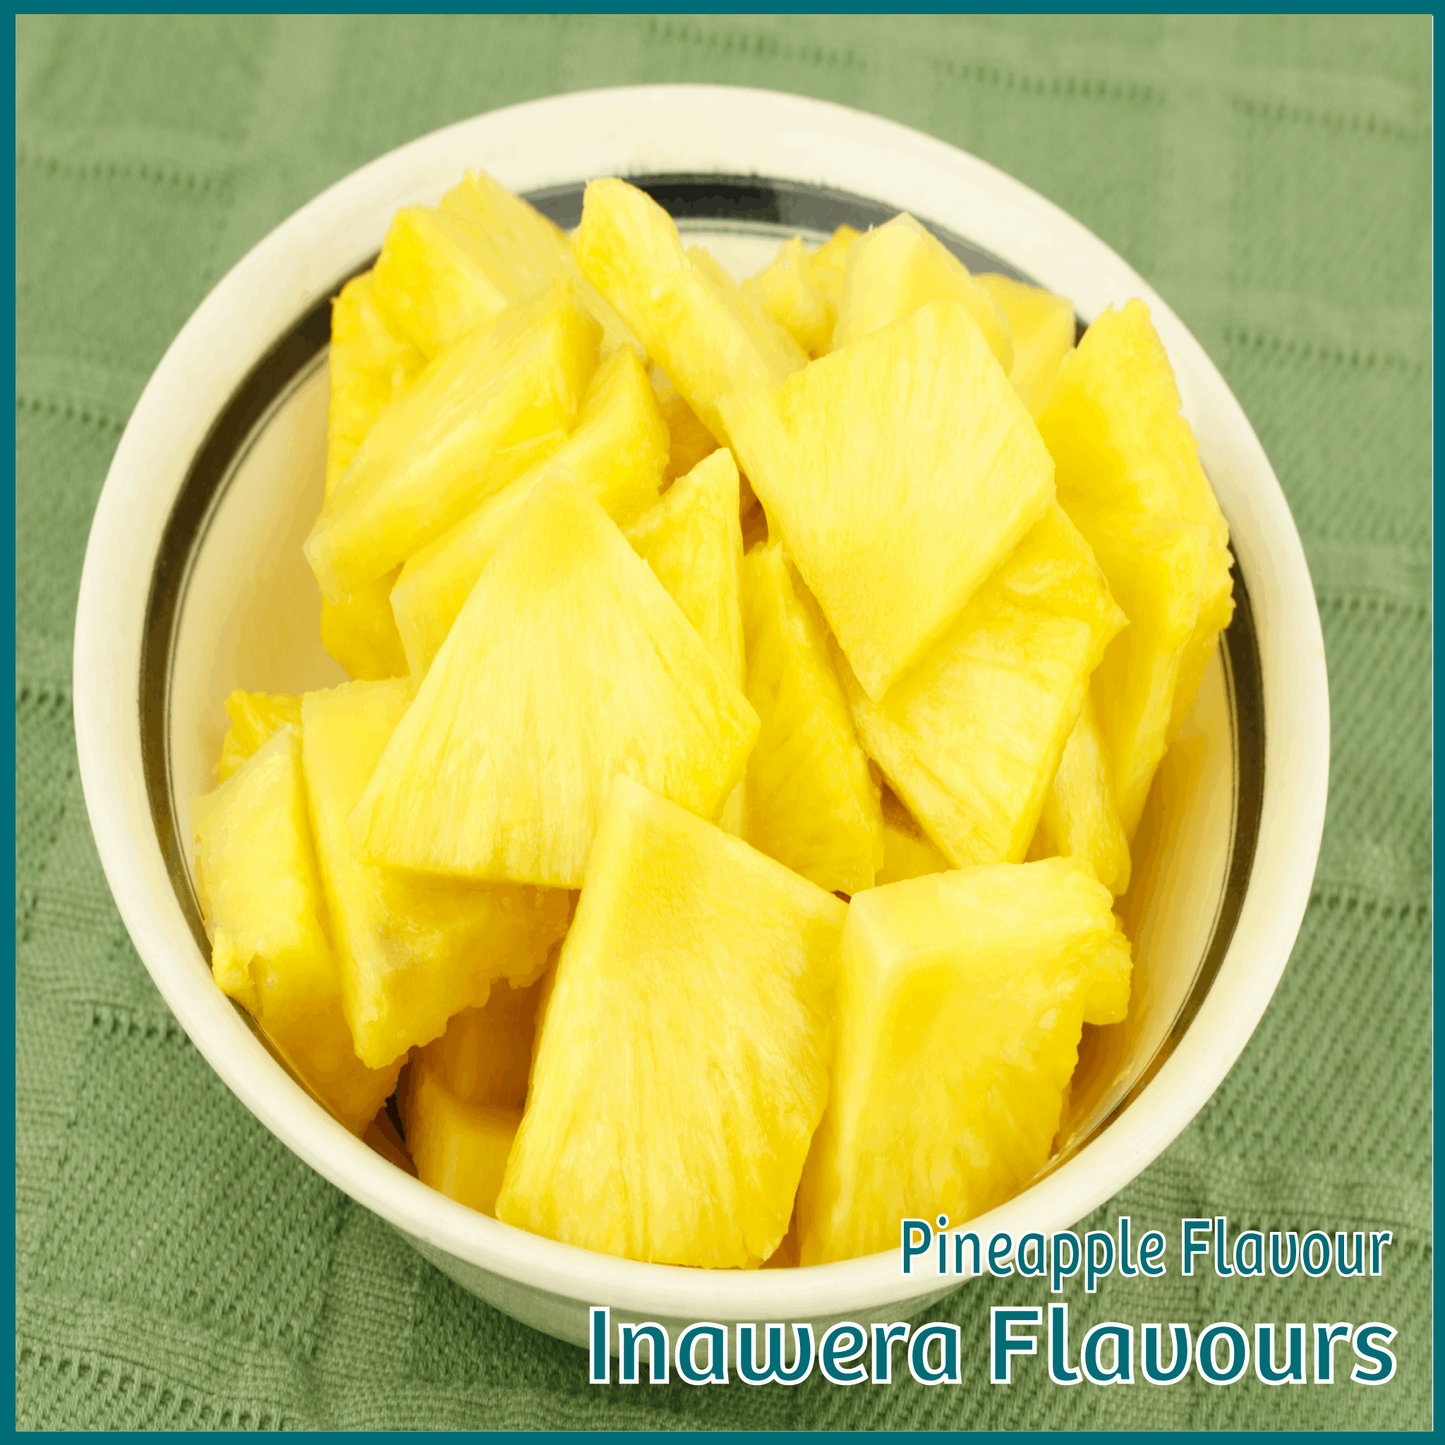 Pineapple Flavour- Inawera - Flavour Fog - Canada's flavour depot.